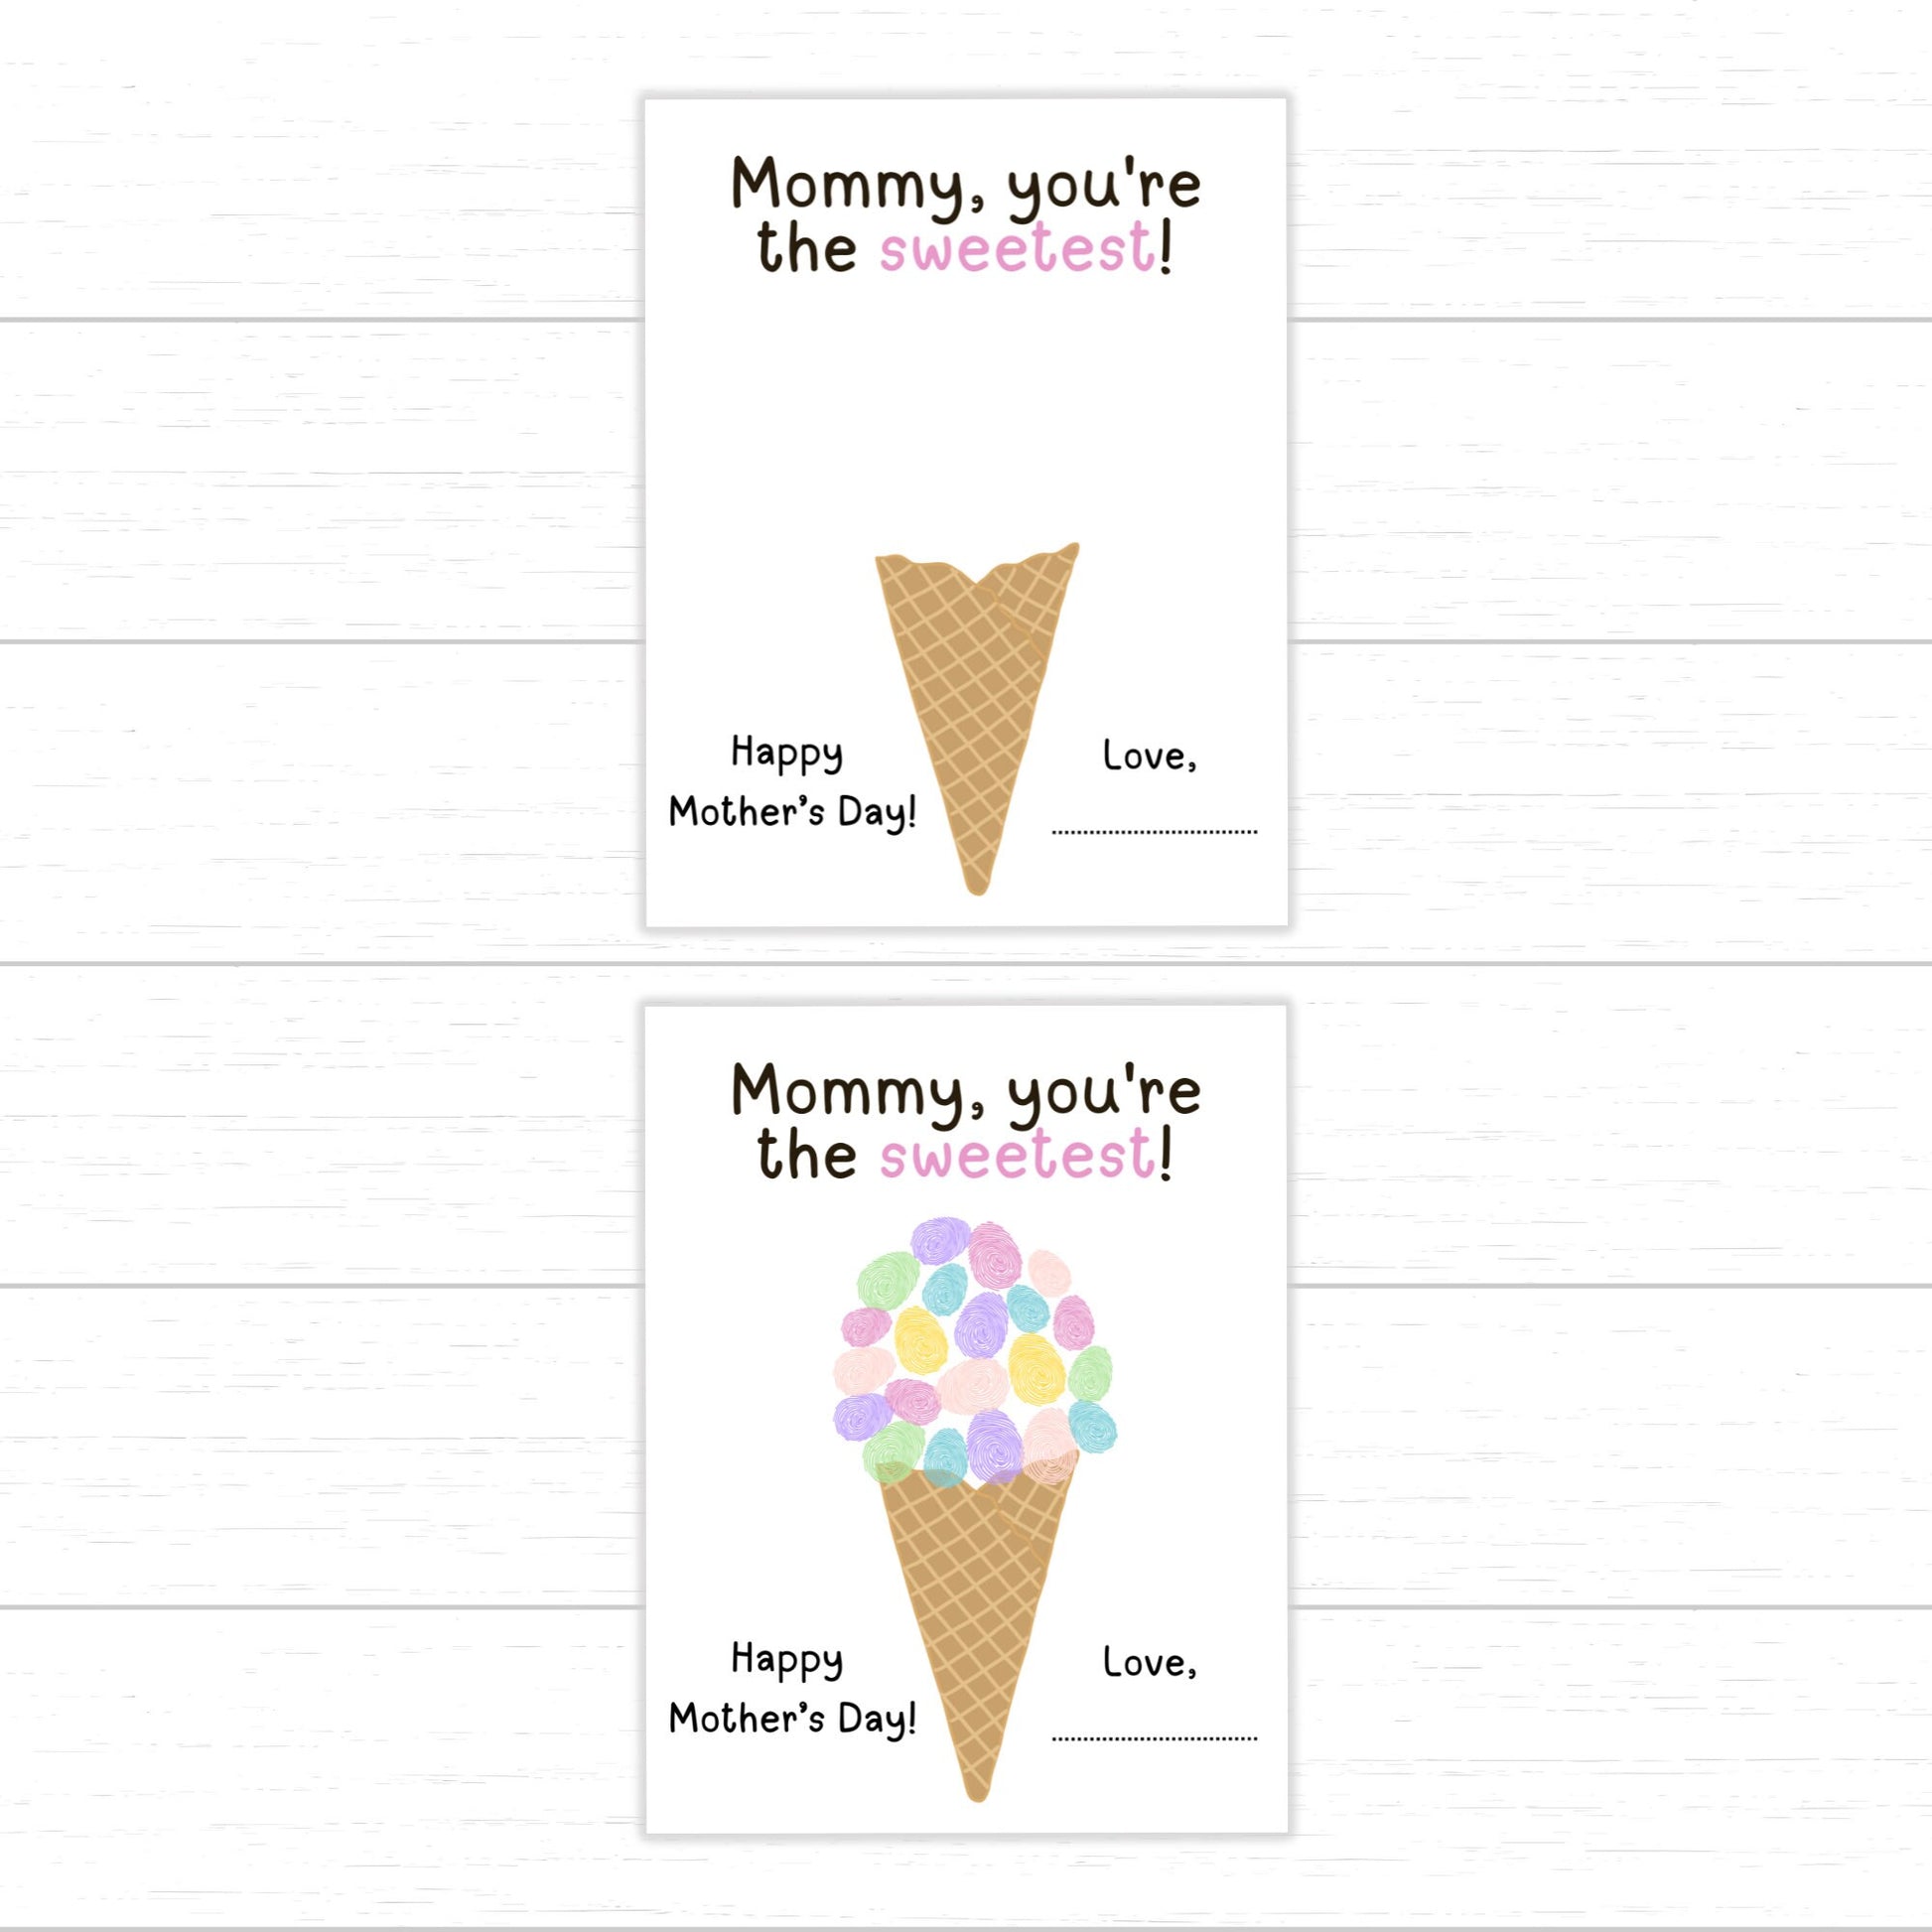 Mother's Day Ice Cream Fingerprint Art, You're the Sweetest, Ice Cream Crafts, DIY Mother's Day Gift, Keepsake for Mom, Mother's Day Craft